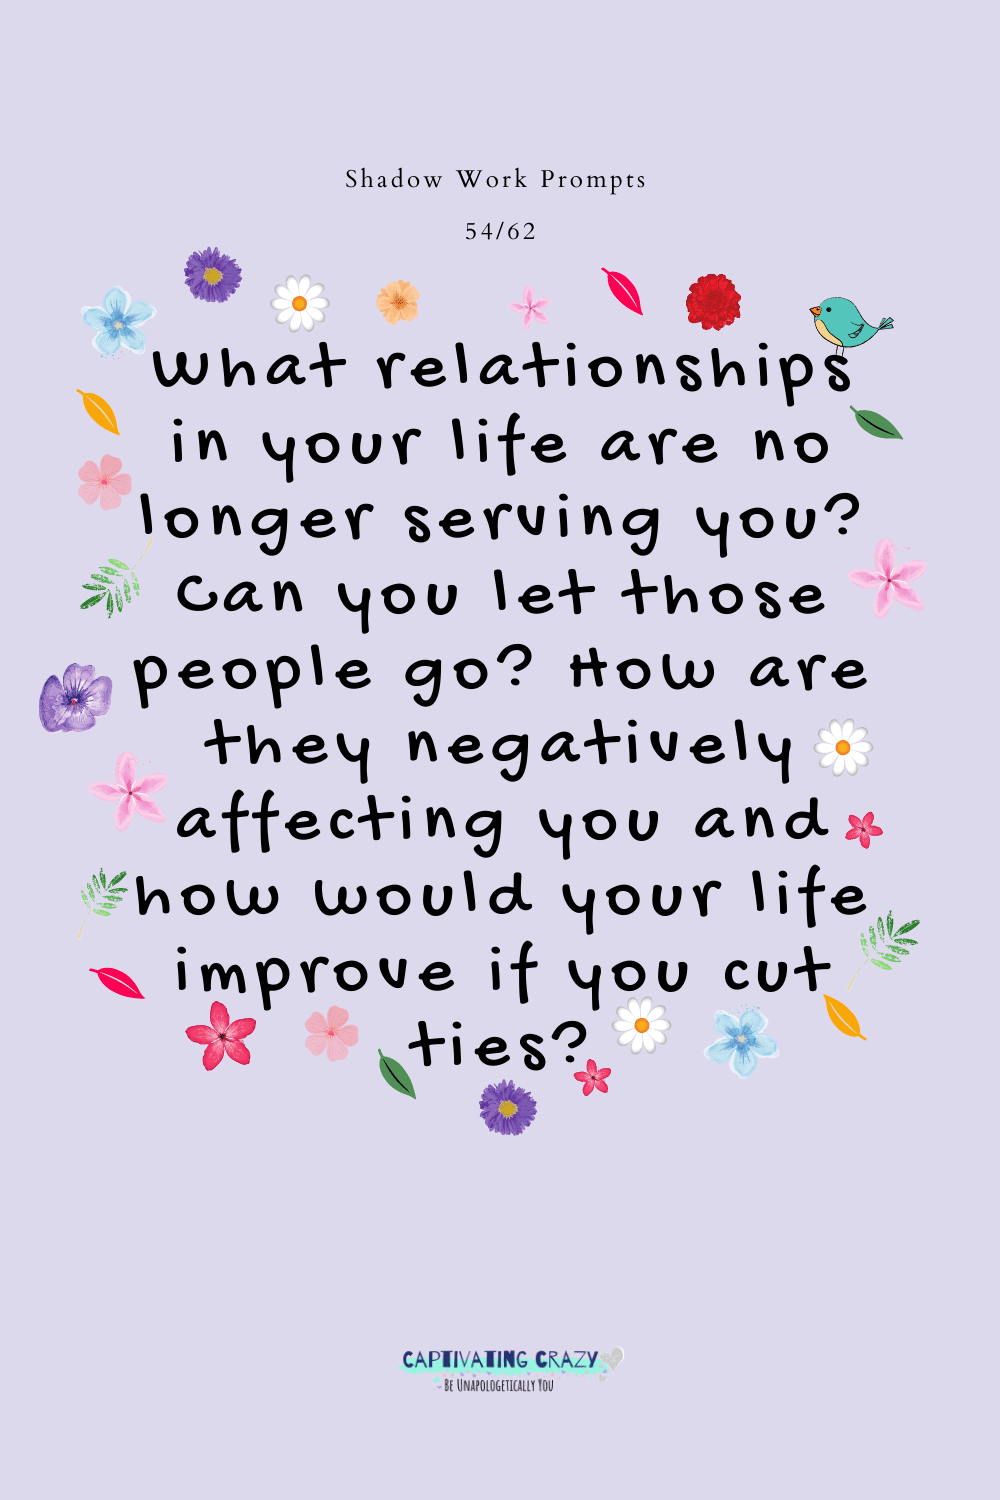 What relationships in your life are no longer serving you? Can you let those people go? How are they negatively affecting you and how would your life improve if you cut ties?